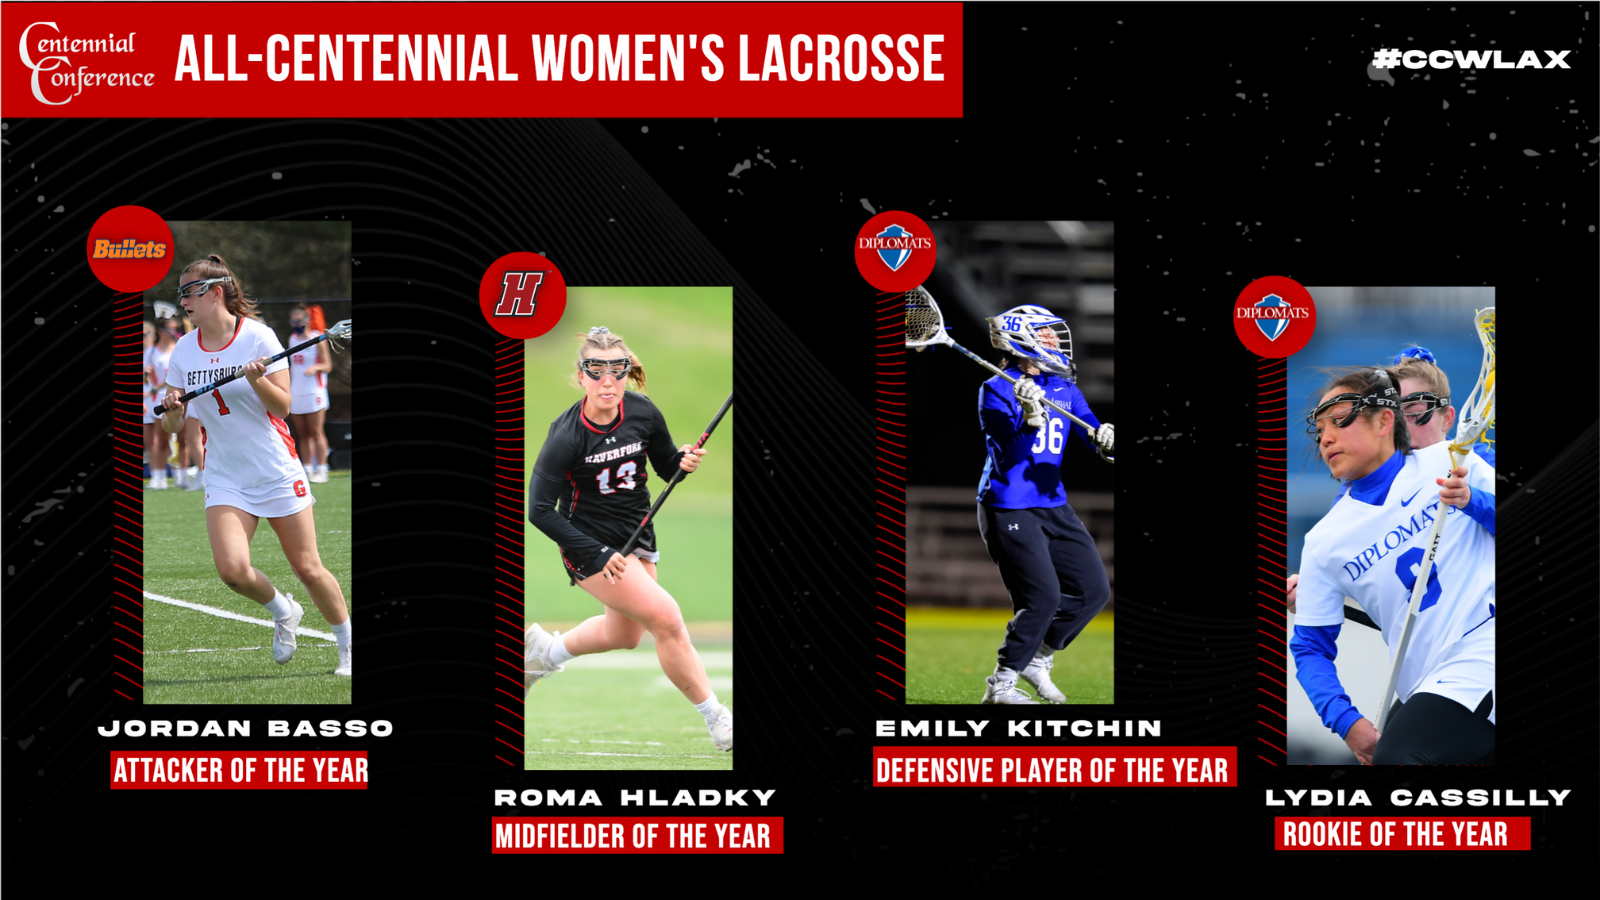 Basso, Hladky & Kitchin Earn Top Honors on All-Centennial Women's Lacrosse Team